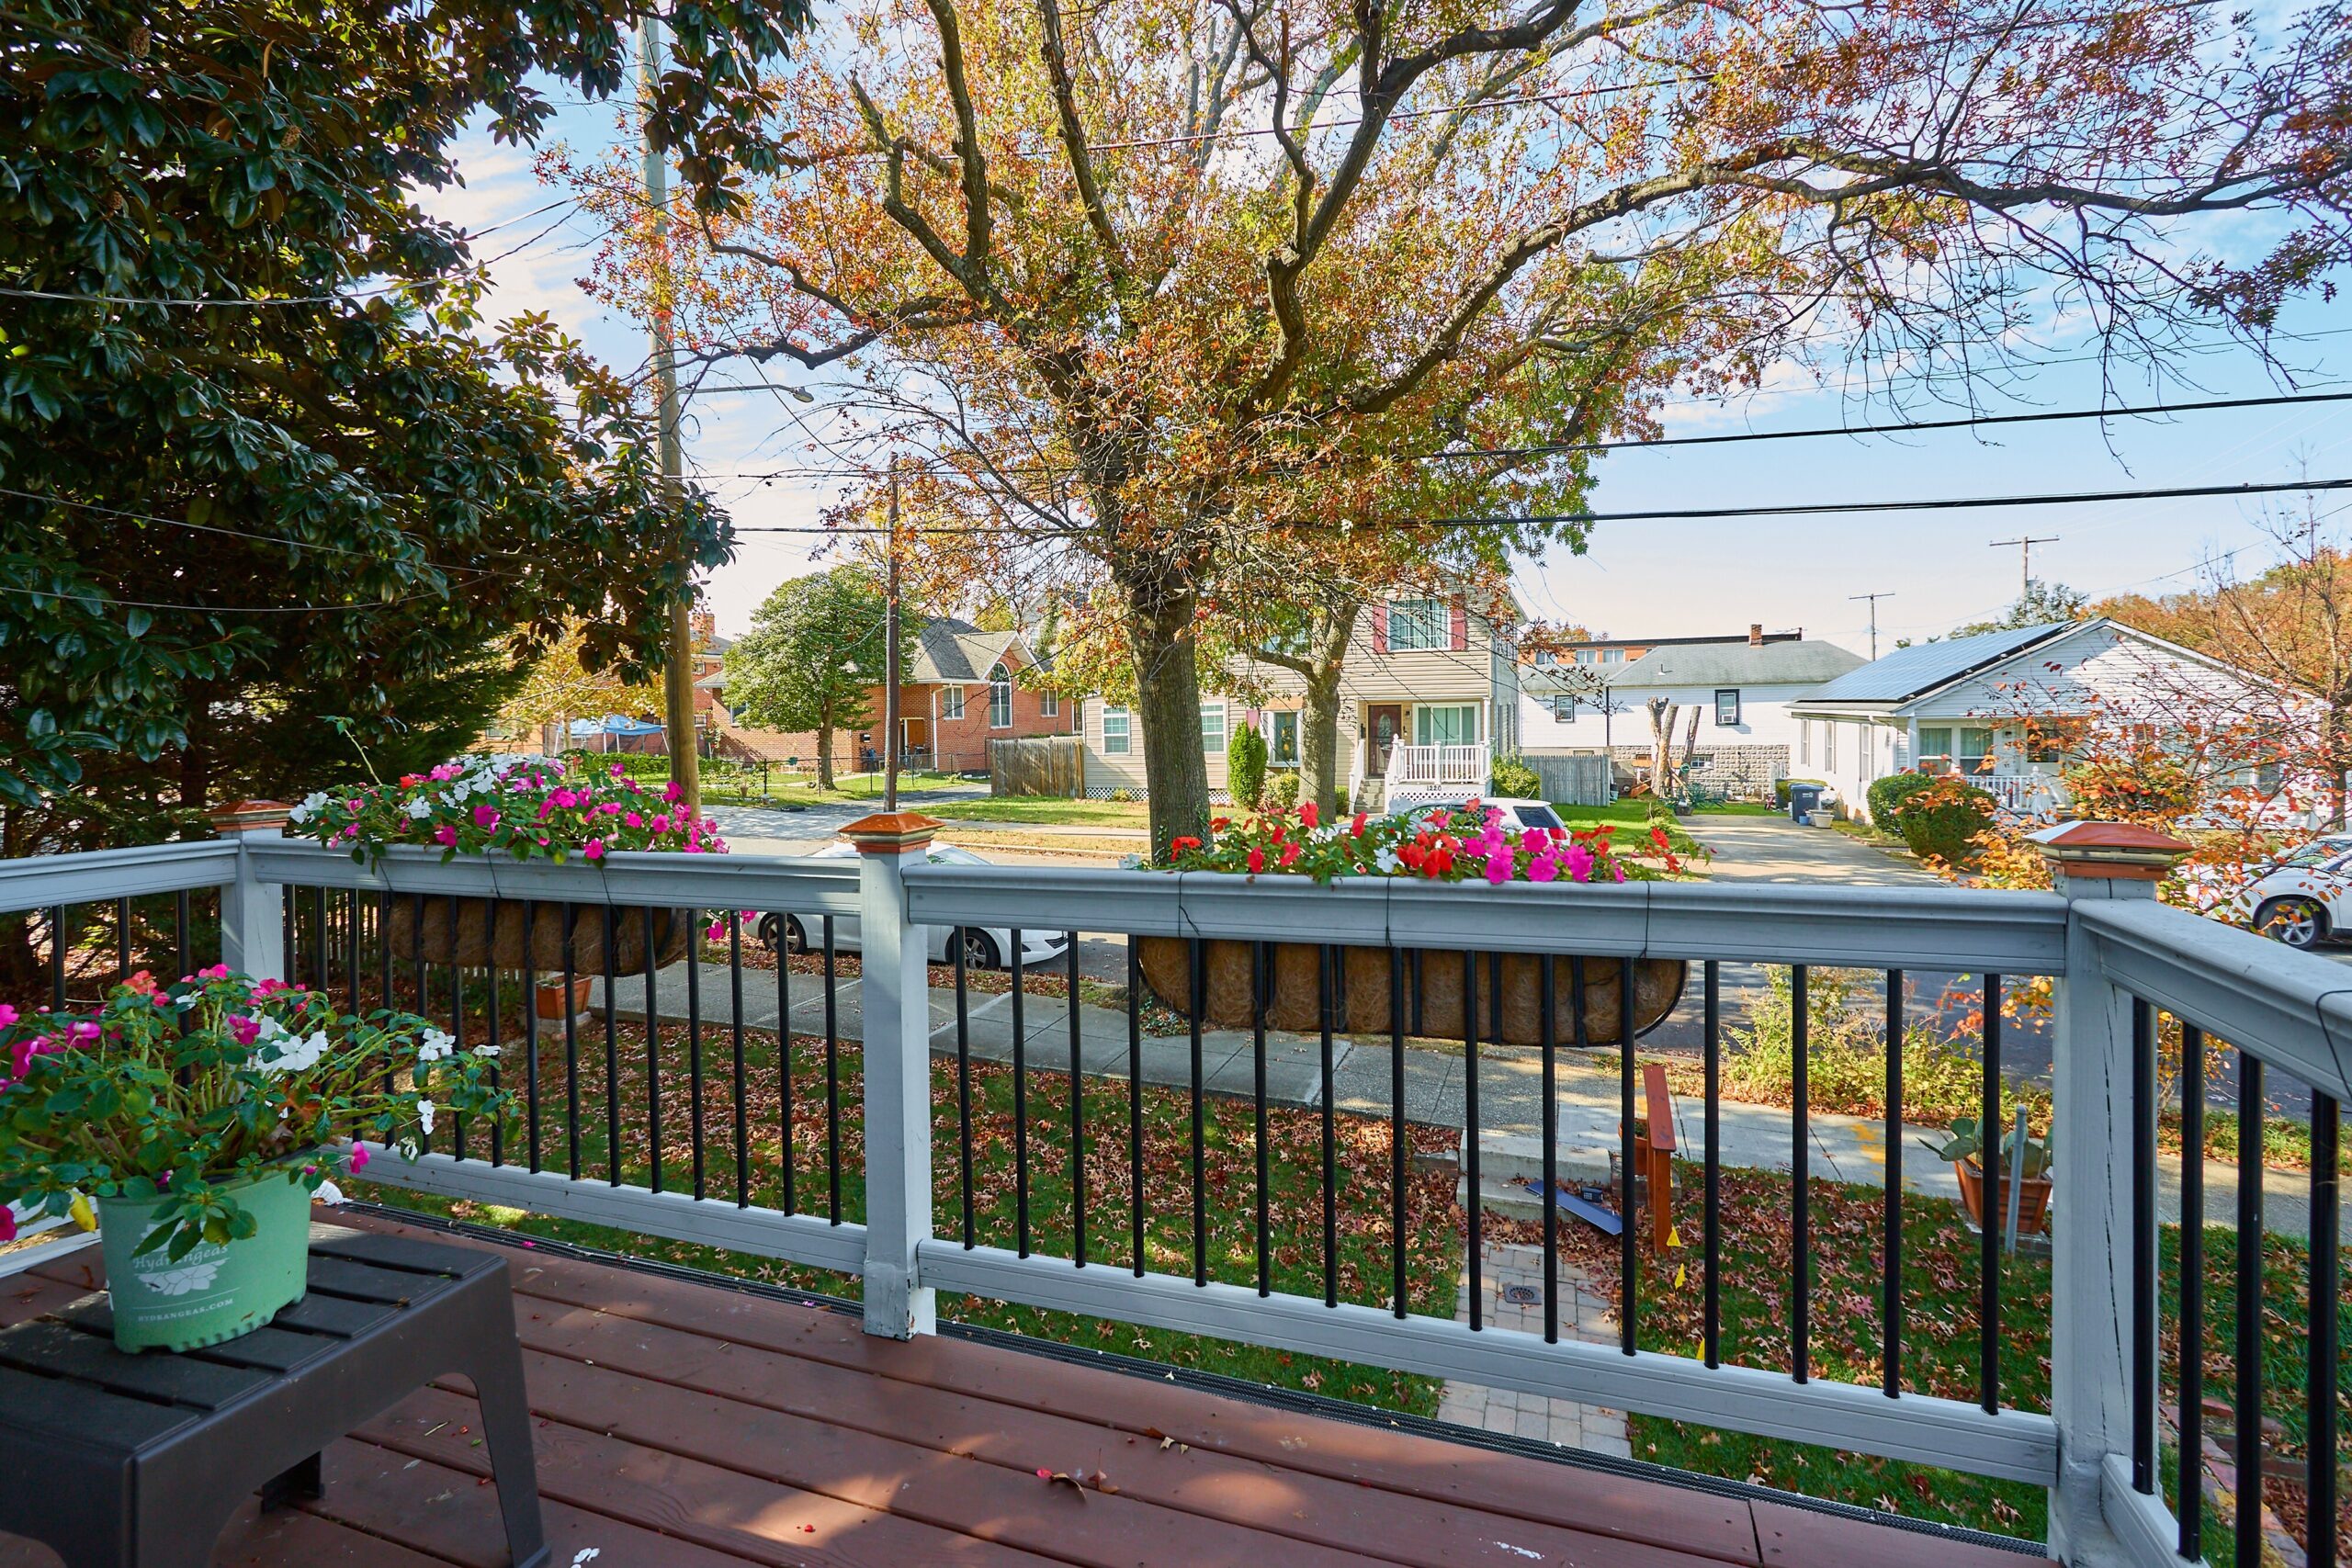 Professional exterior photo of 1219 50th St NE in Washington, DC - showing the view from the 2nd floor balcony looking out the front toward the street on an early fall day